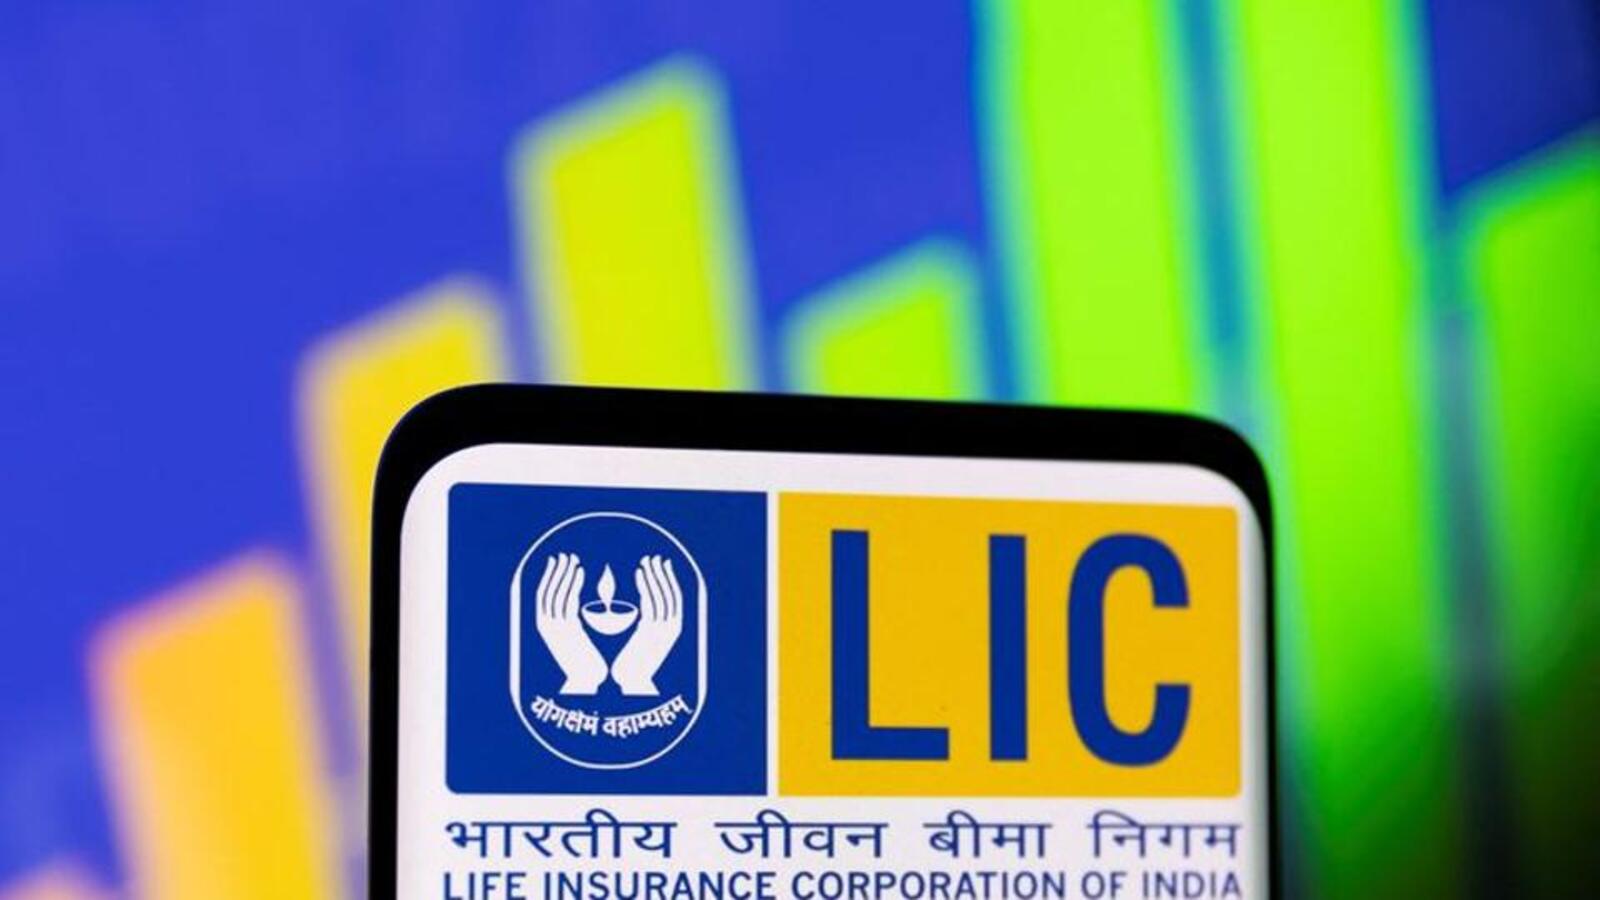 Govt may offload up to 25% of its share in LIC in next 5 years ...